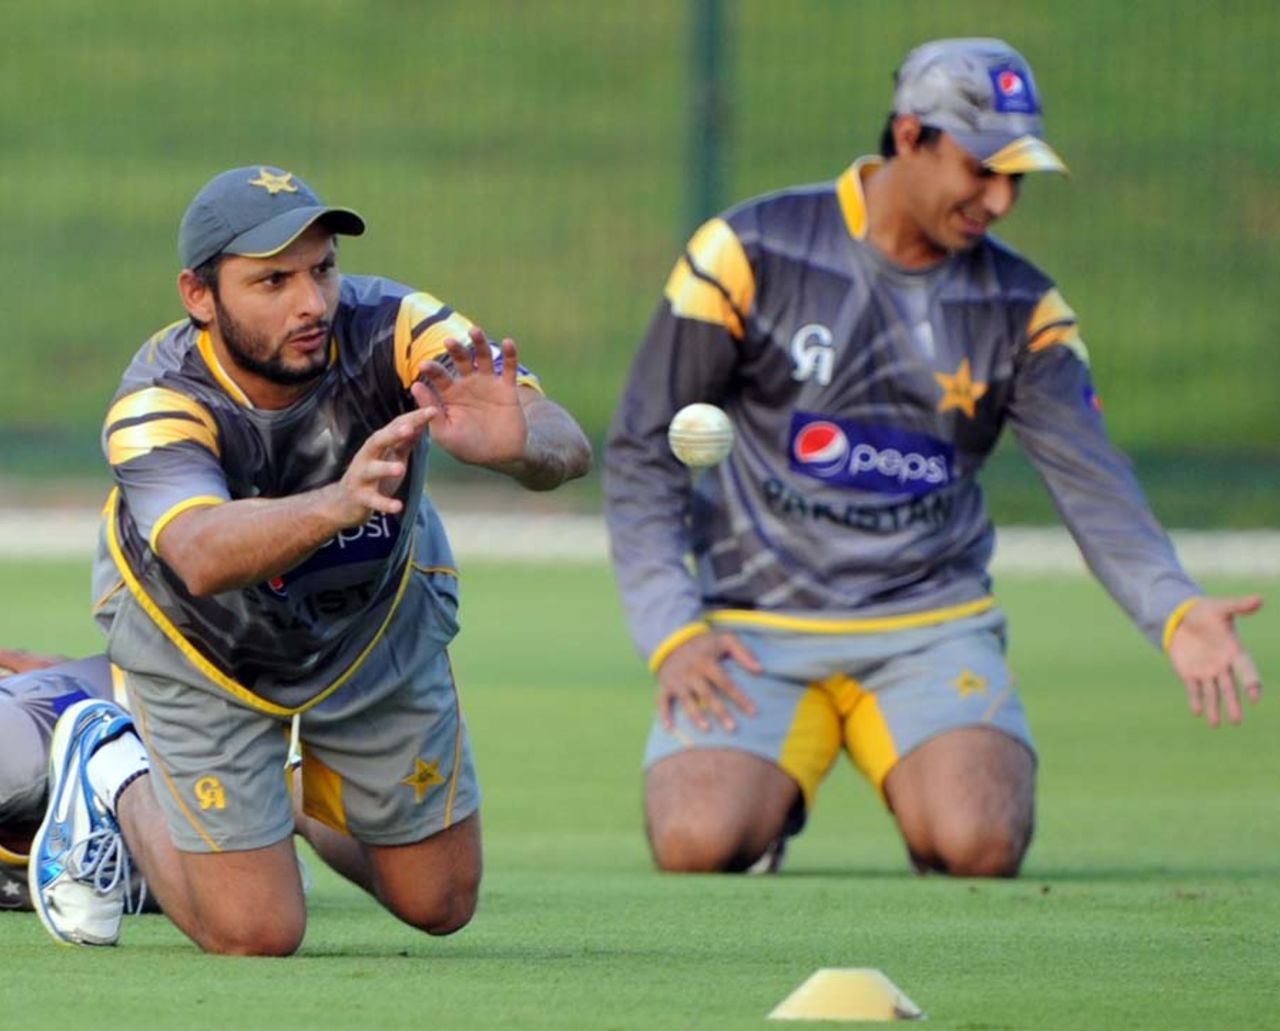 Shahid Afridi takes a catch at a practice session, Abu Dhabi, August 30, 2012